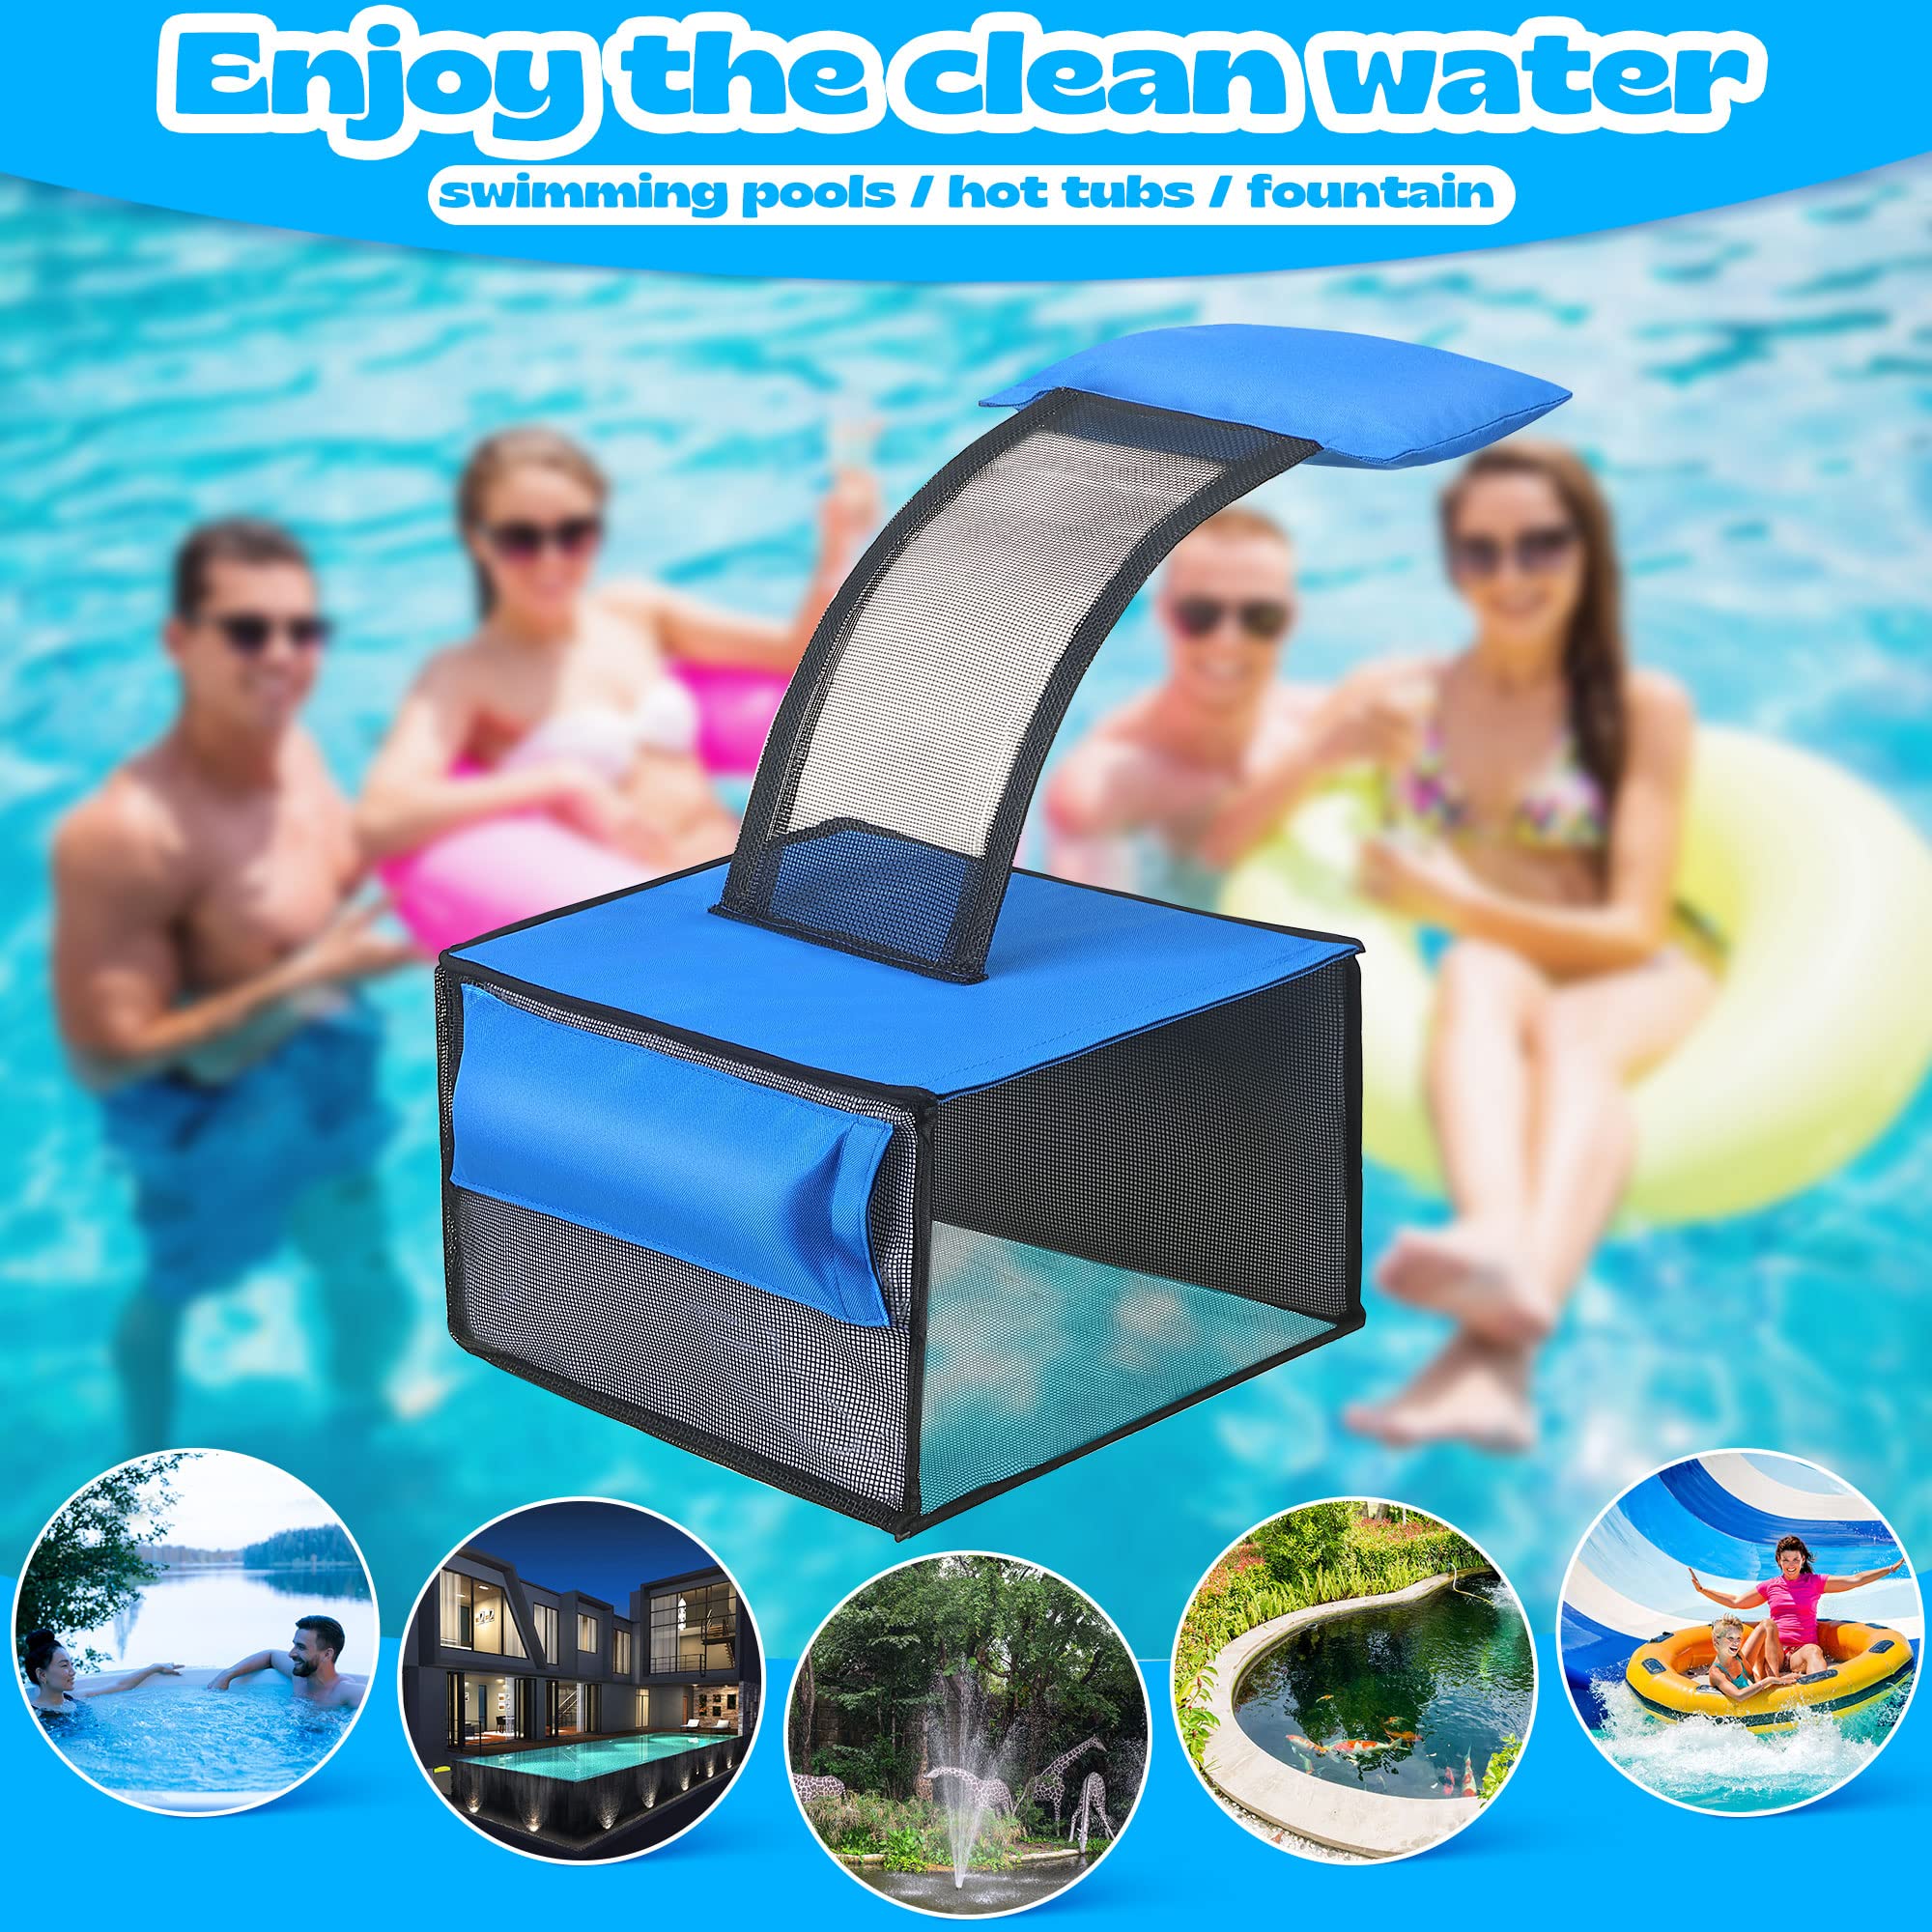 Swimming Pool Net Leaf Liberate Hands Skimmer with Animal Saving Escape Ramp, Heavy Duty Pool Leaf Fine Mesh Cleaning Net Skimmer, Rescue Pool Critter Saver Floating Ramp Accessories (Dark Blue)